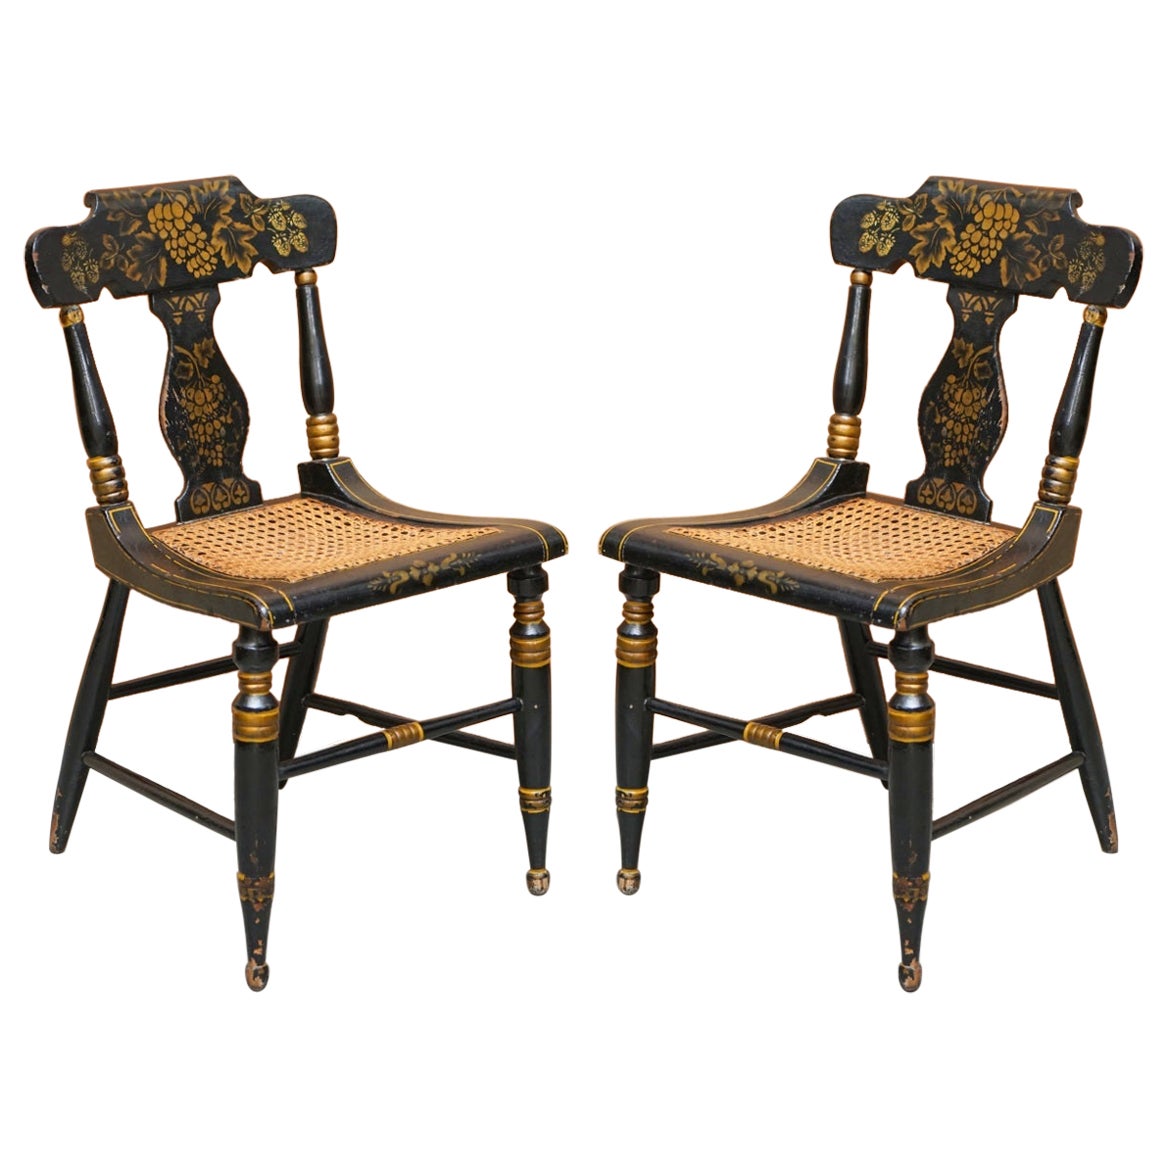 Pair of circa 1825 Georgian Baltimore Ebonised Painted Gilt Bergere Side Chairs